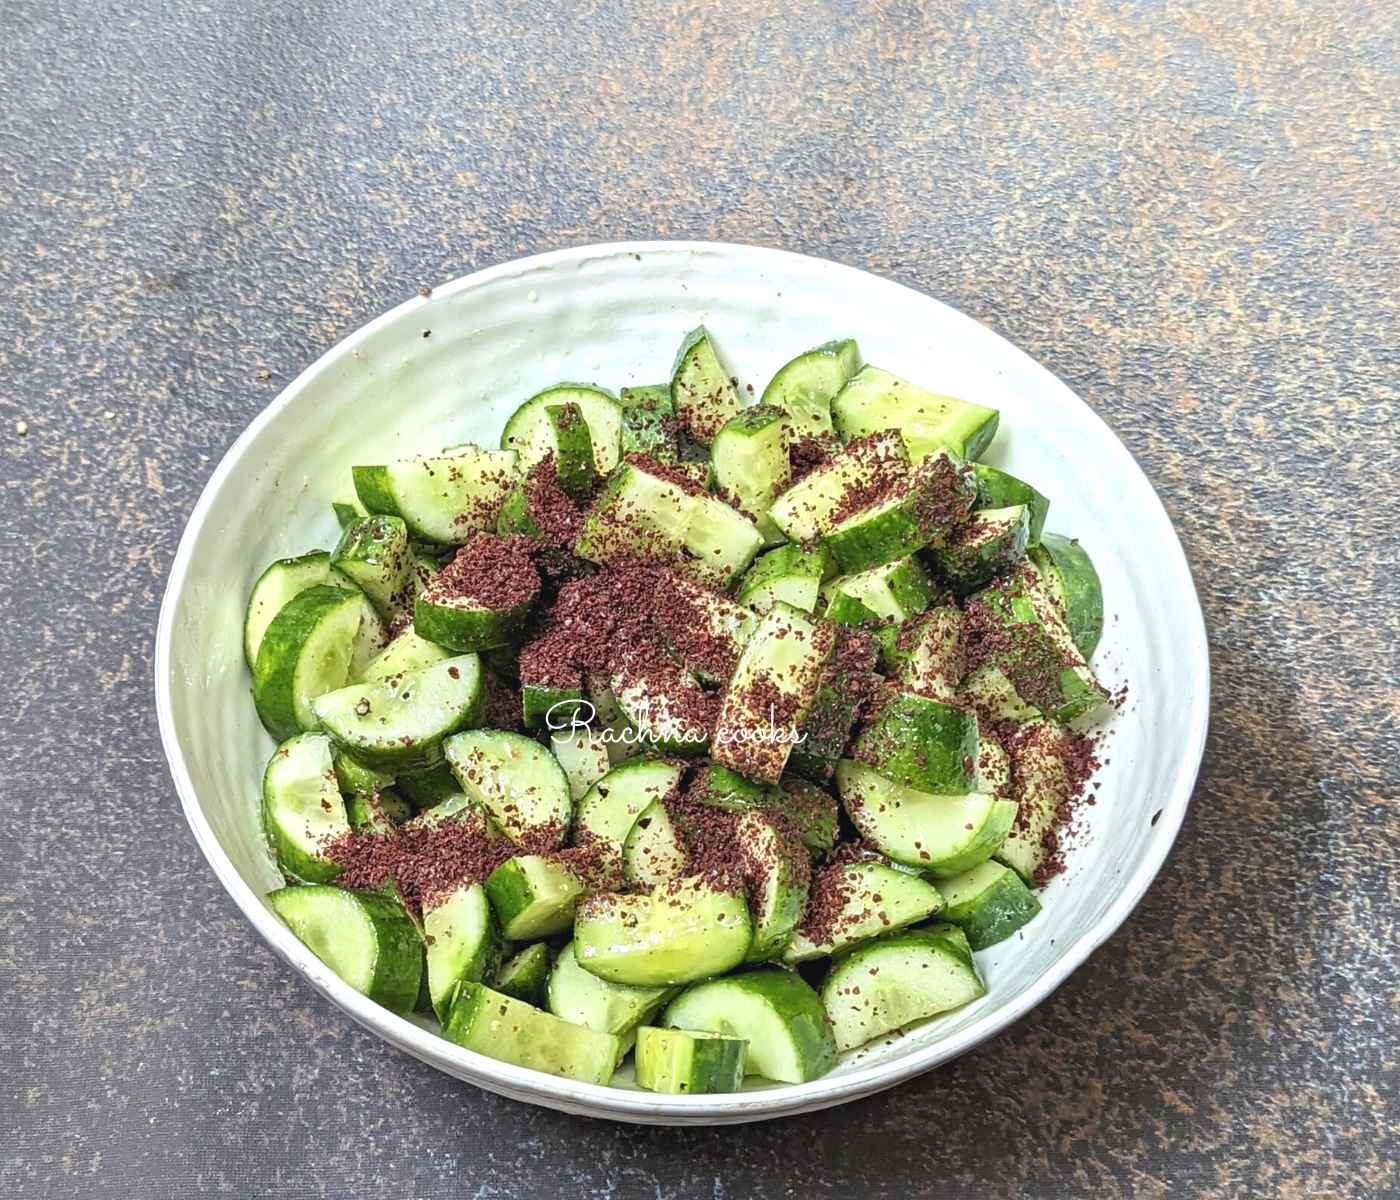 Sumac on chopped cucumbers with spices.